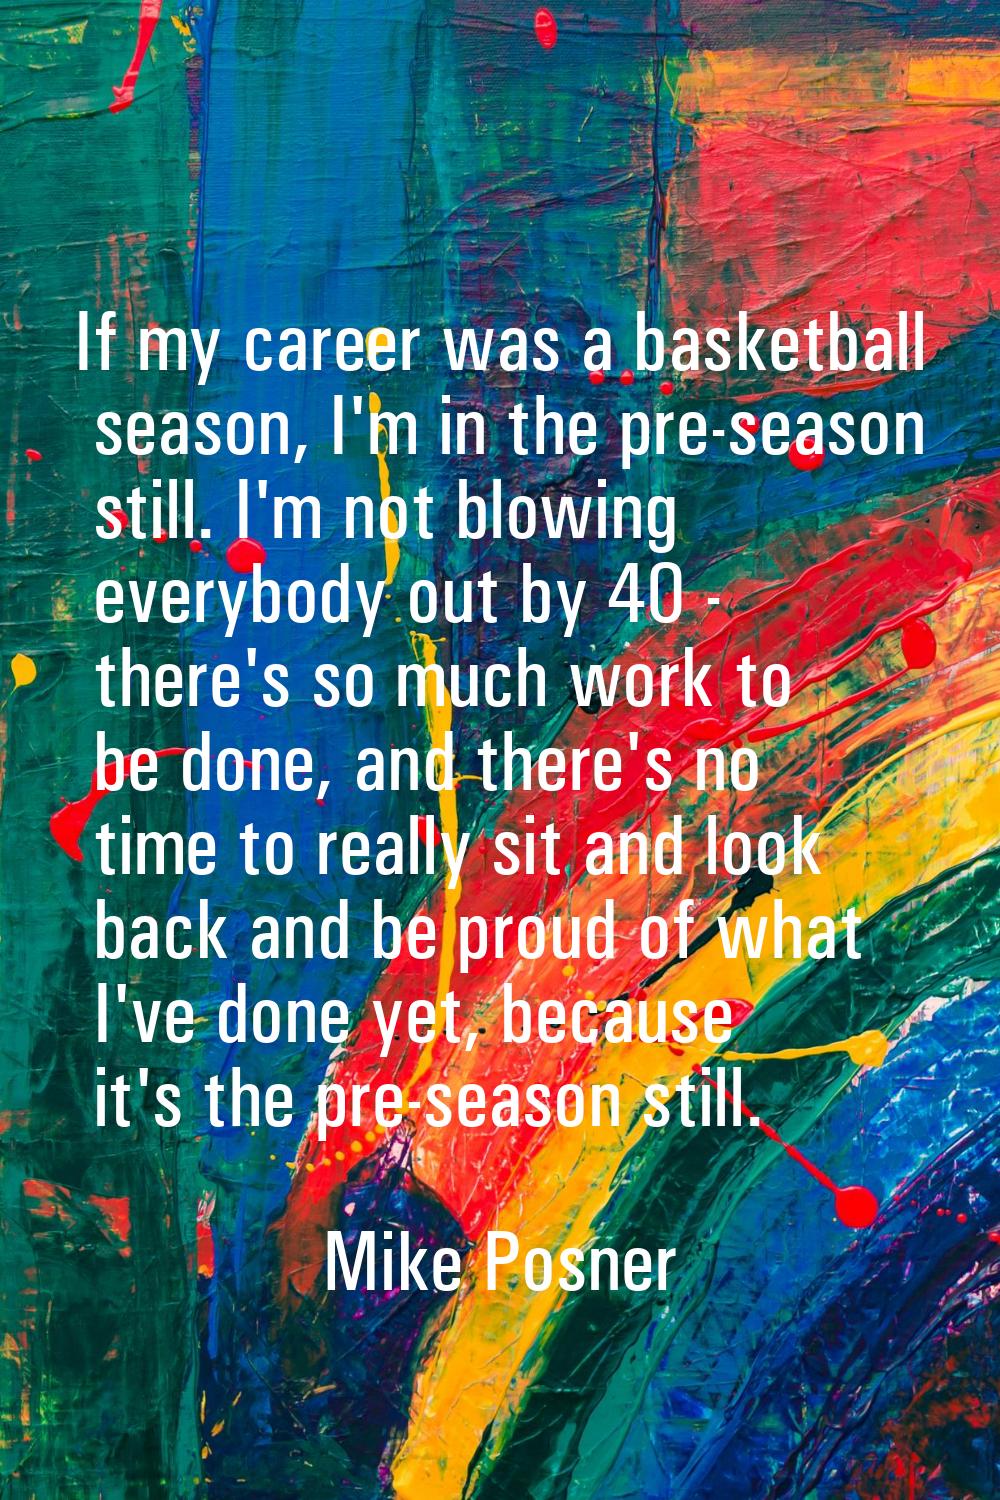 If my career was a basketball season, I'm in the pre-season still. I'm not blowing everybody out by